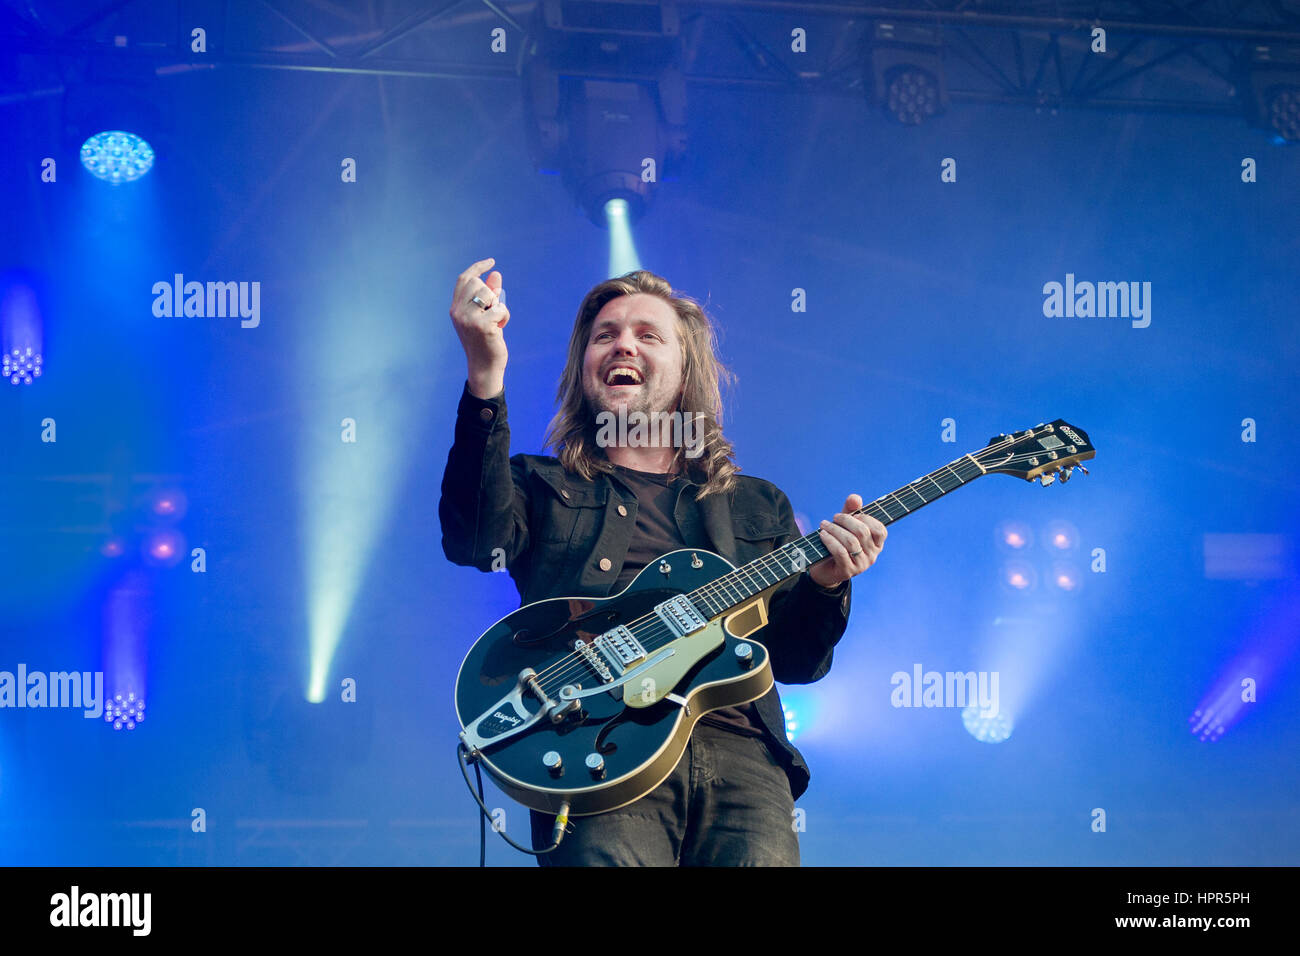 Band Of Skulls - Russell Marsden Performing Live At Liverpool Sound City Festival May 2016 Stock Photo